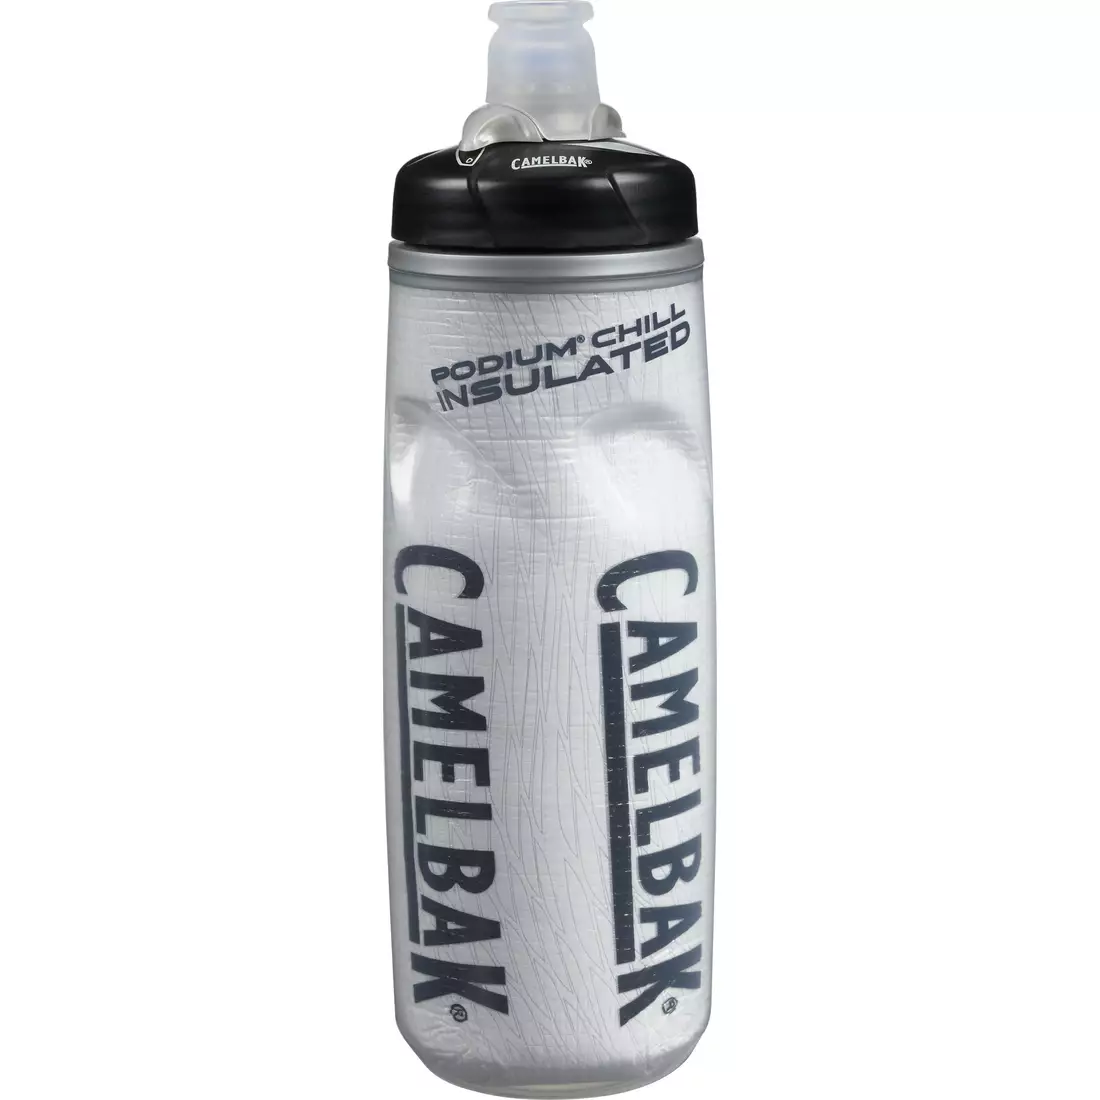 Camelbak SS18 Thermal Cycling Water Bottle Podium Chill 21oz/620ml Race Edition